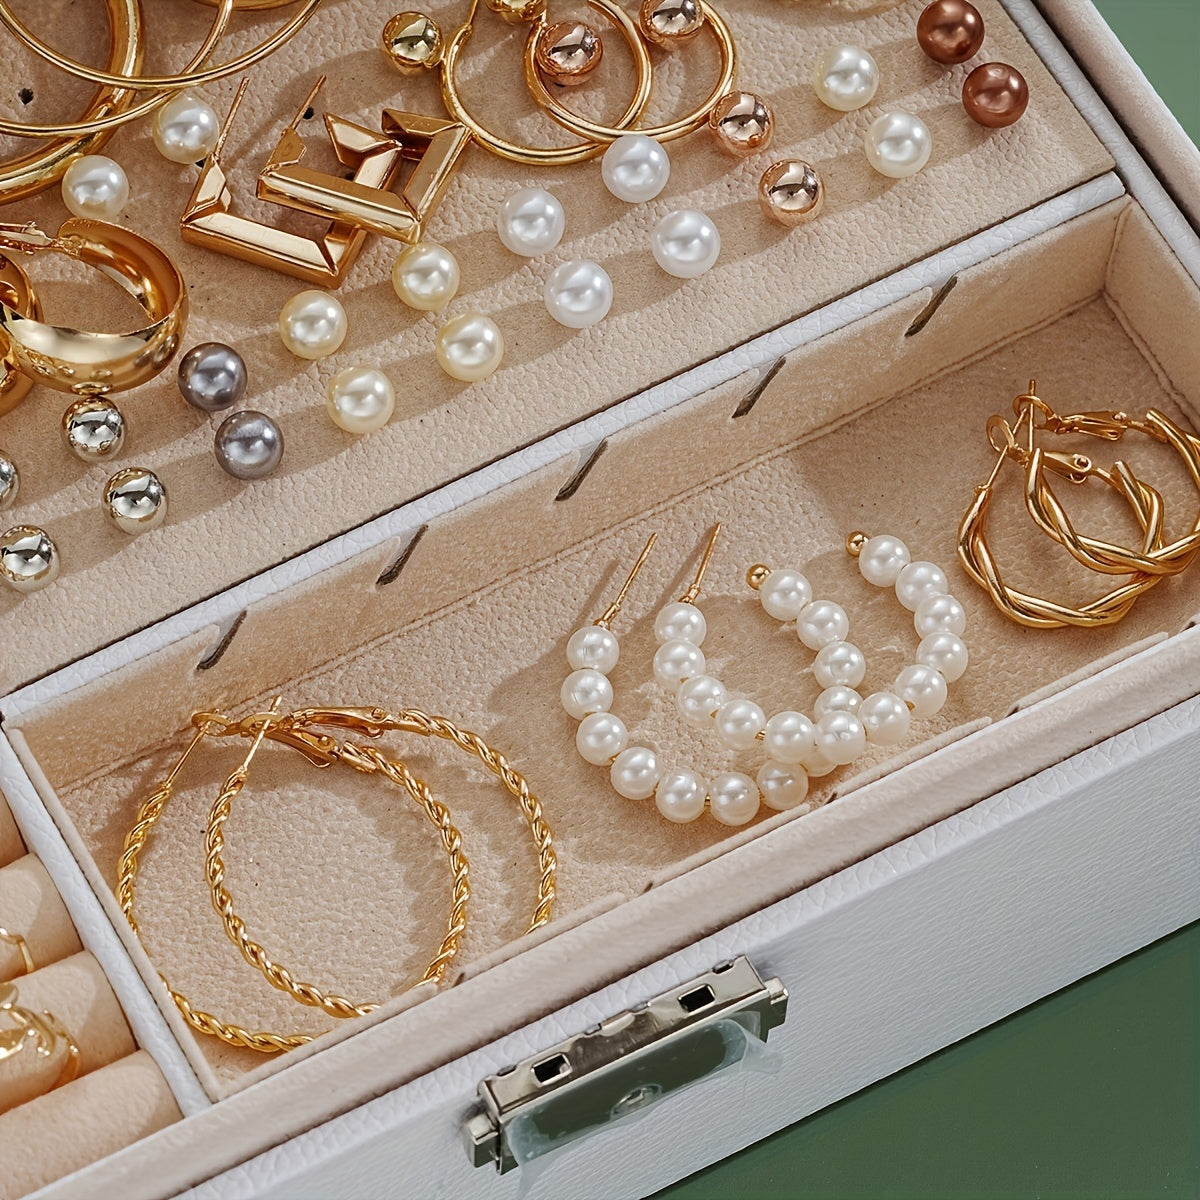 Sparkling Collection: 56-Piece Jewelry Set Including Necklaces, Earrings, and Rings